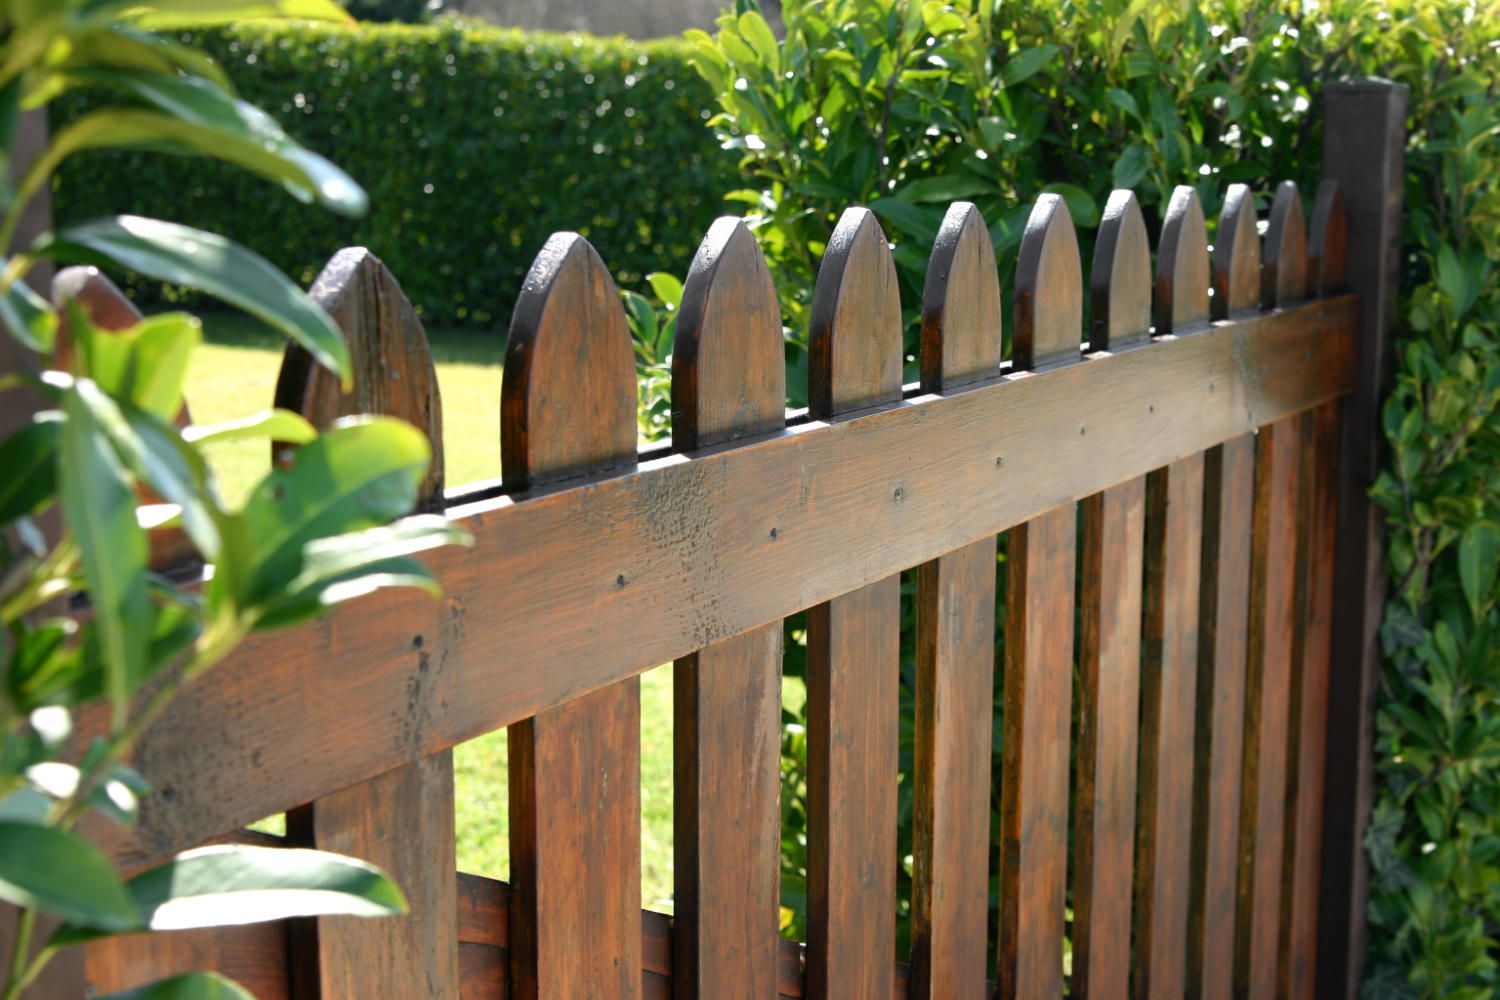 A rustic garden enclosed by a brown wooden fence, creating a charming and natural boundary.